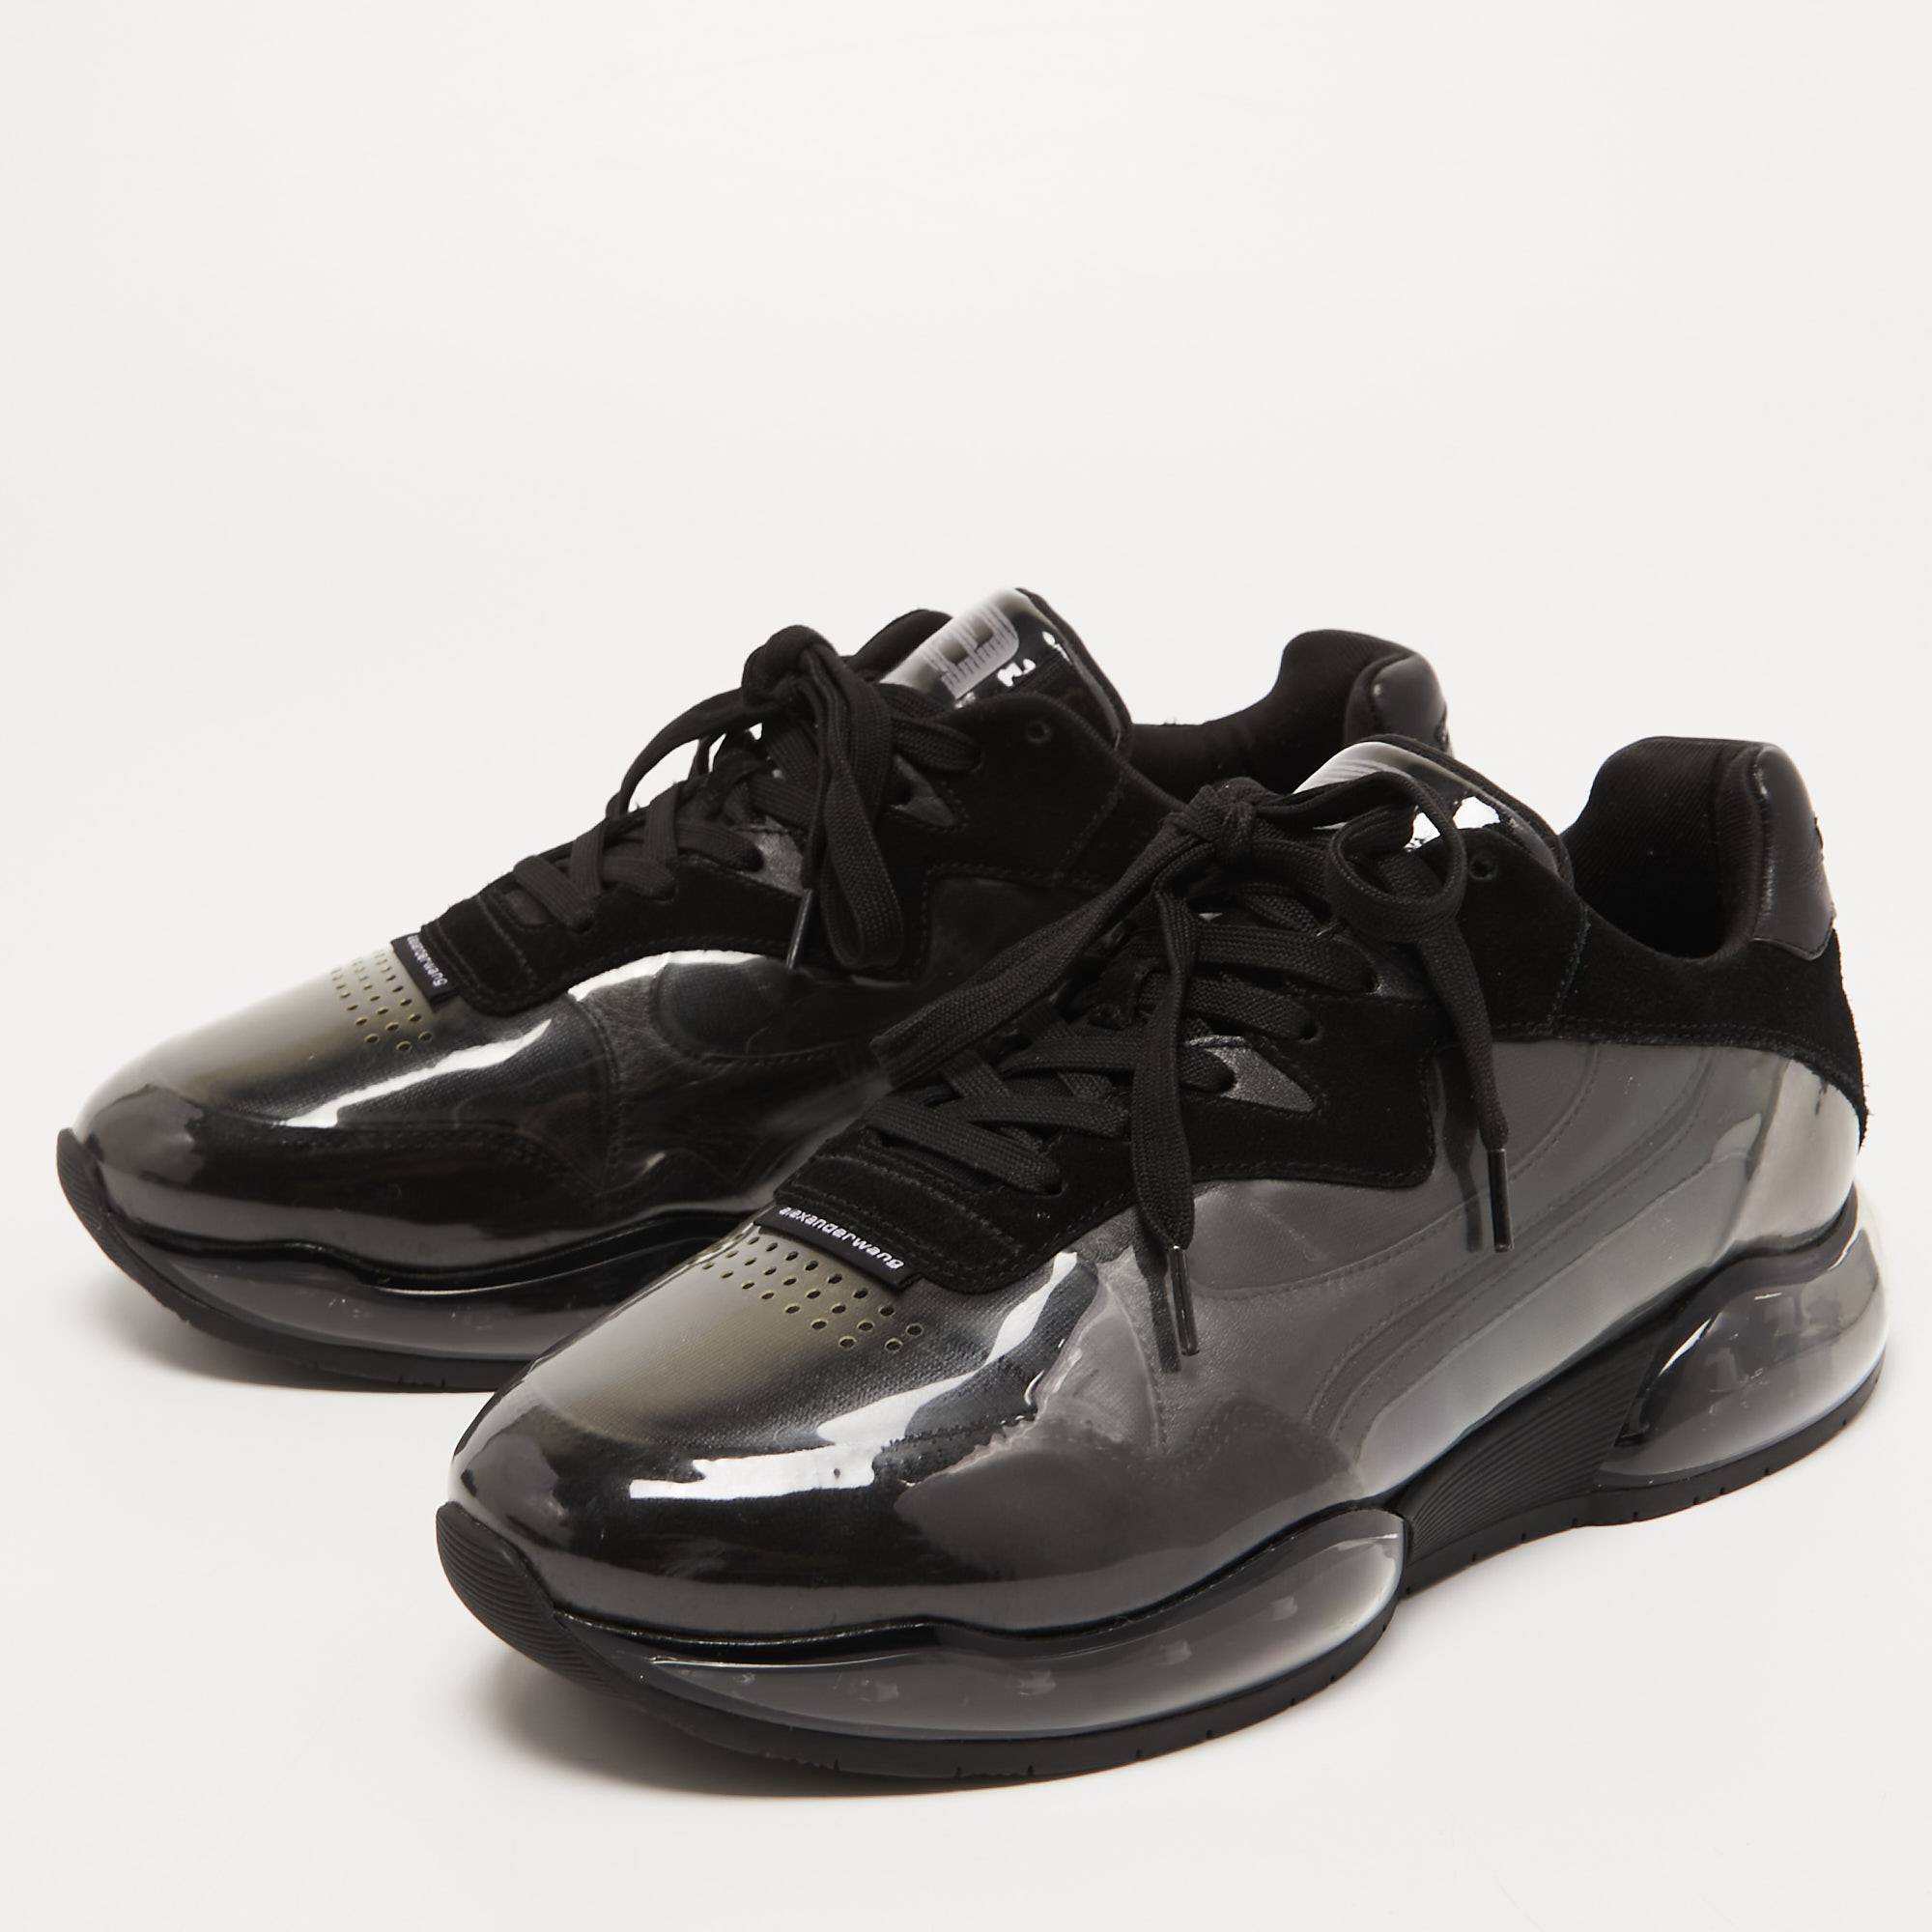 

Alexander Wang Black Suede and PVC Low Top Sneakers Size